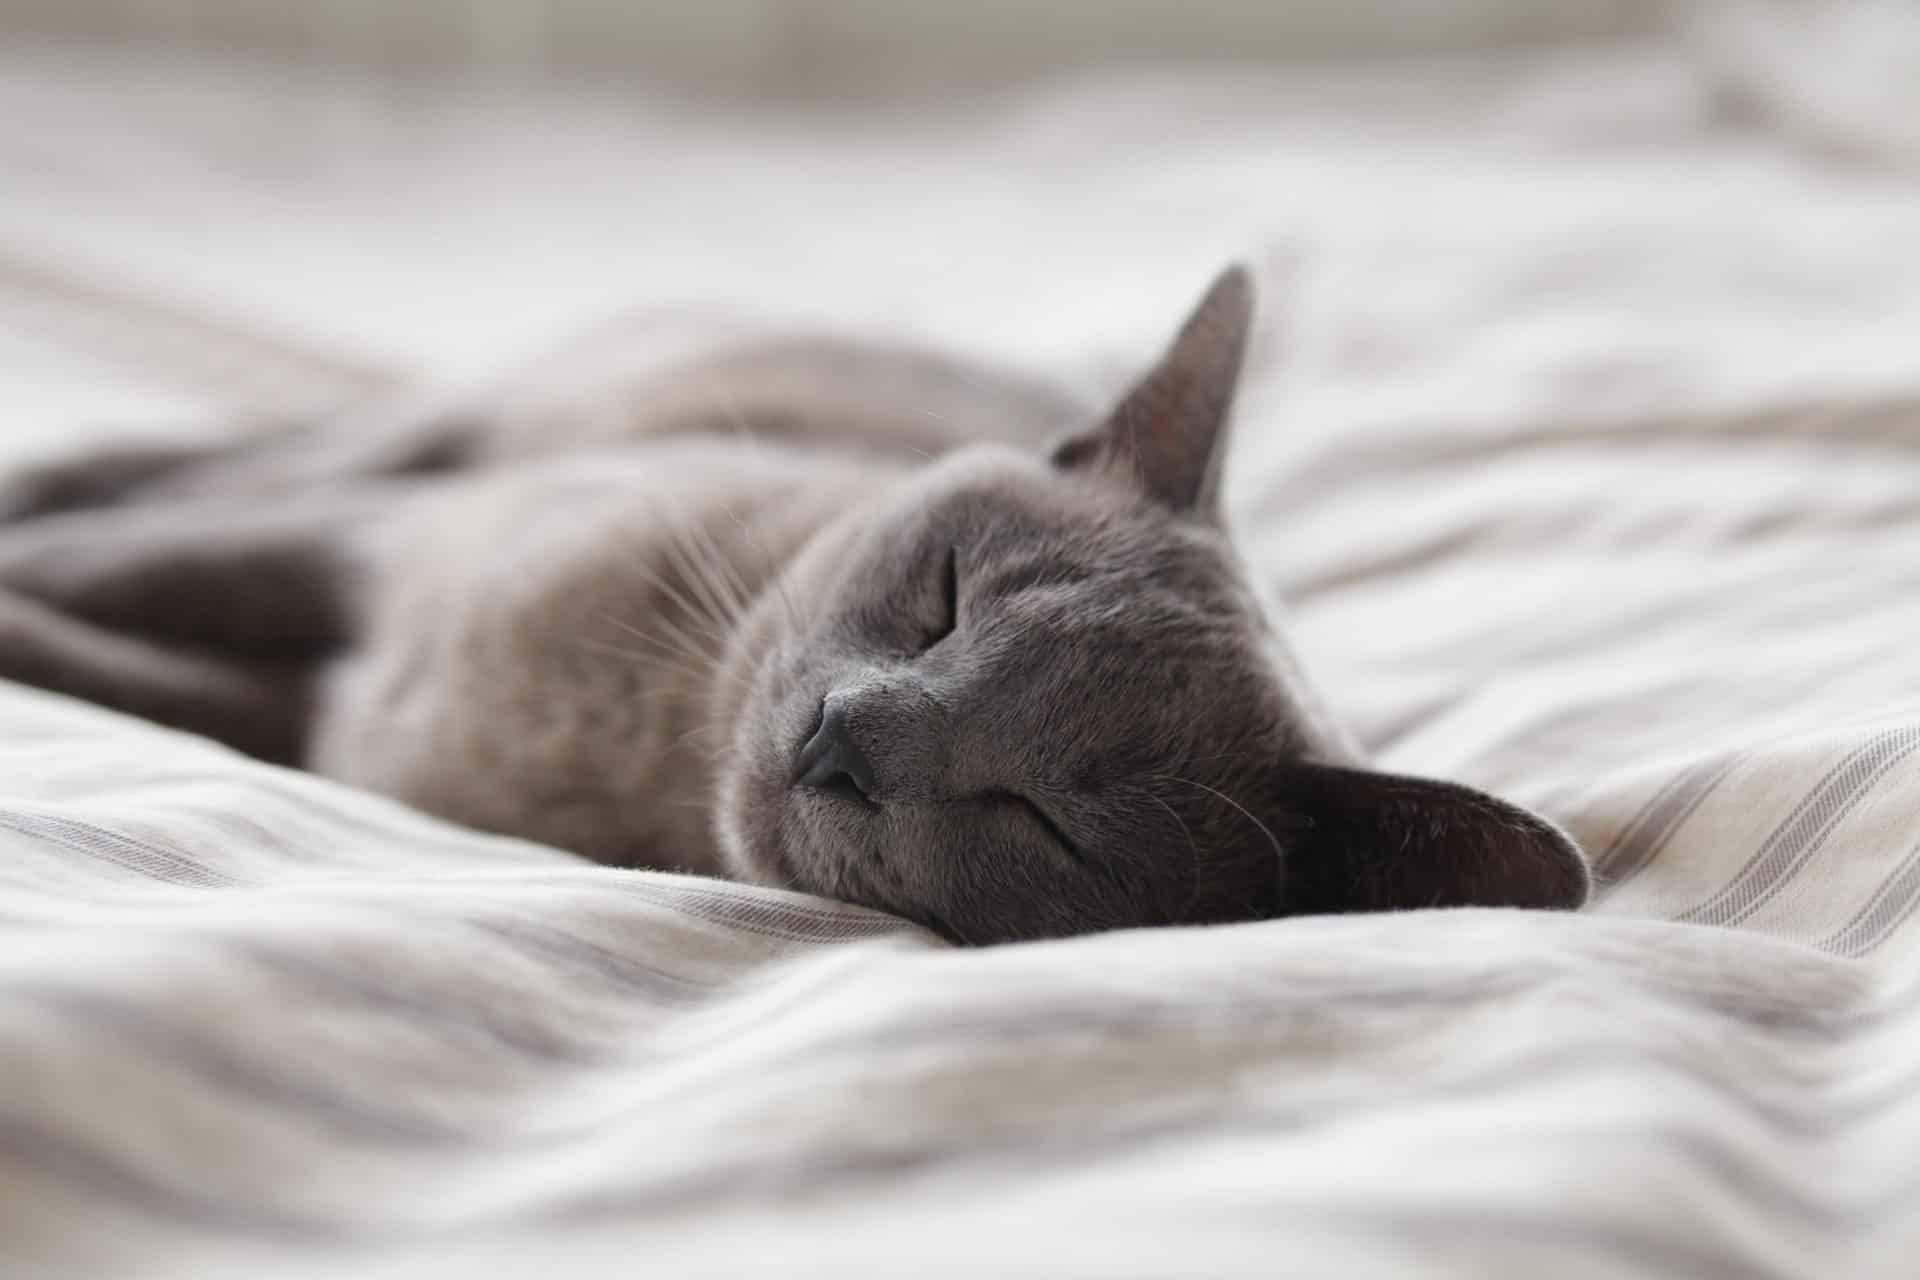 A grey cat sleeping peacefully on a bed.